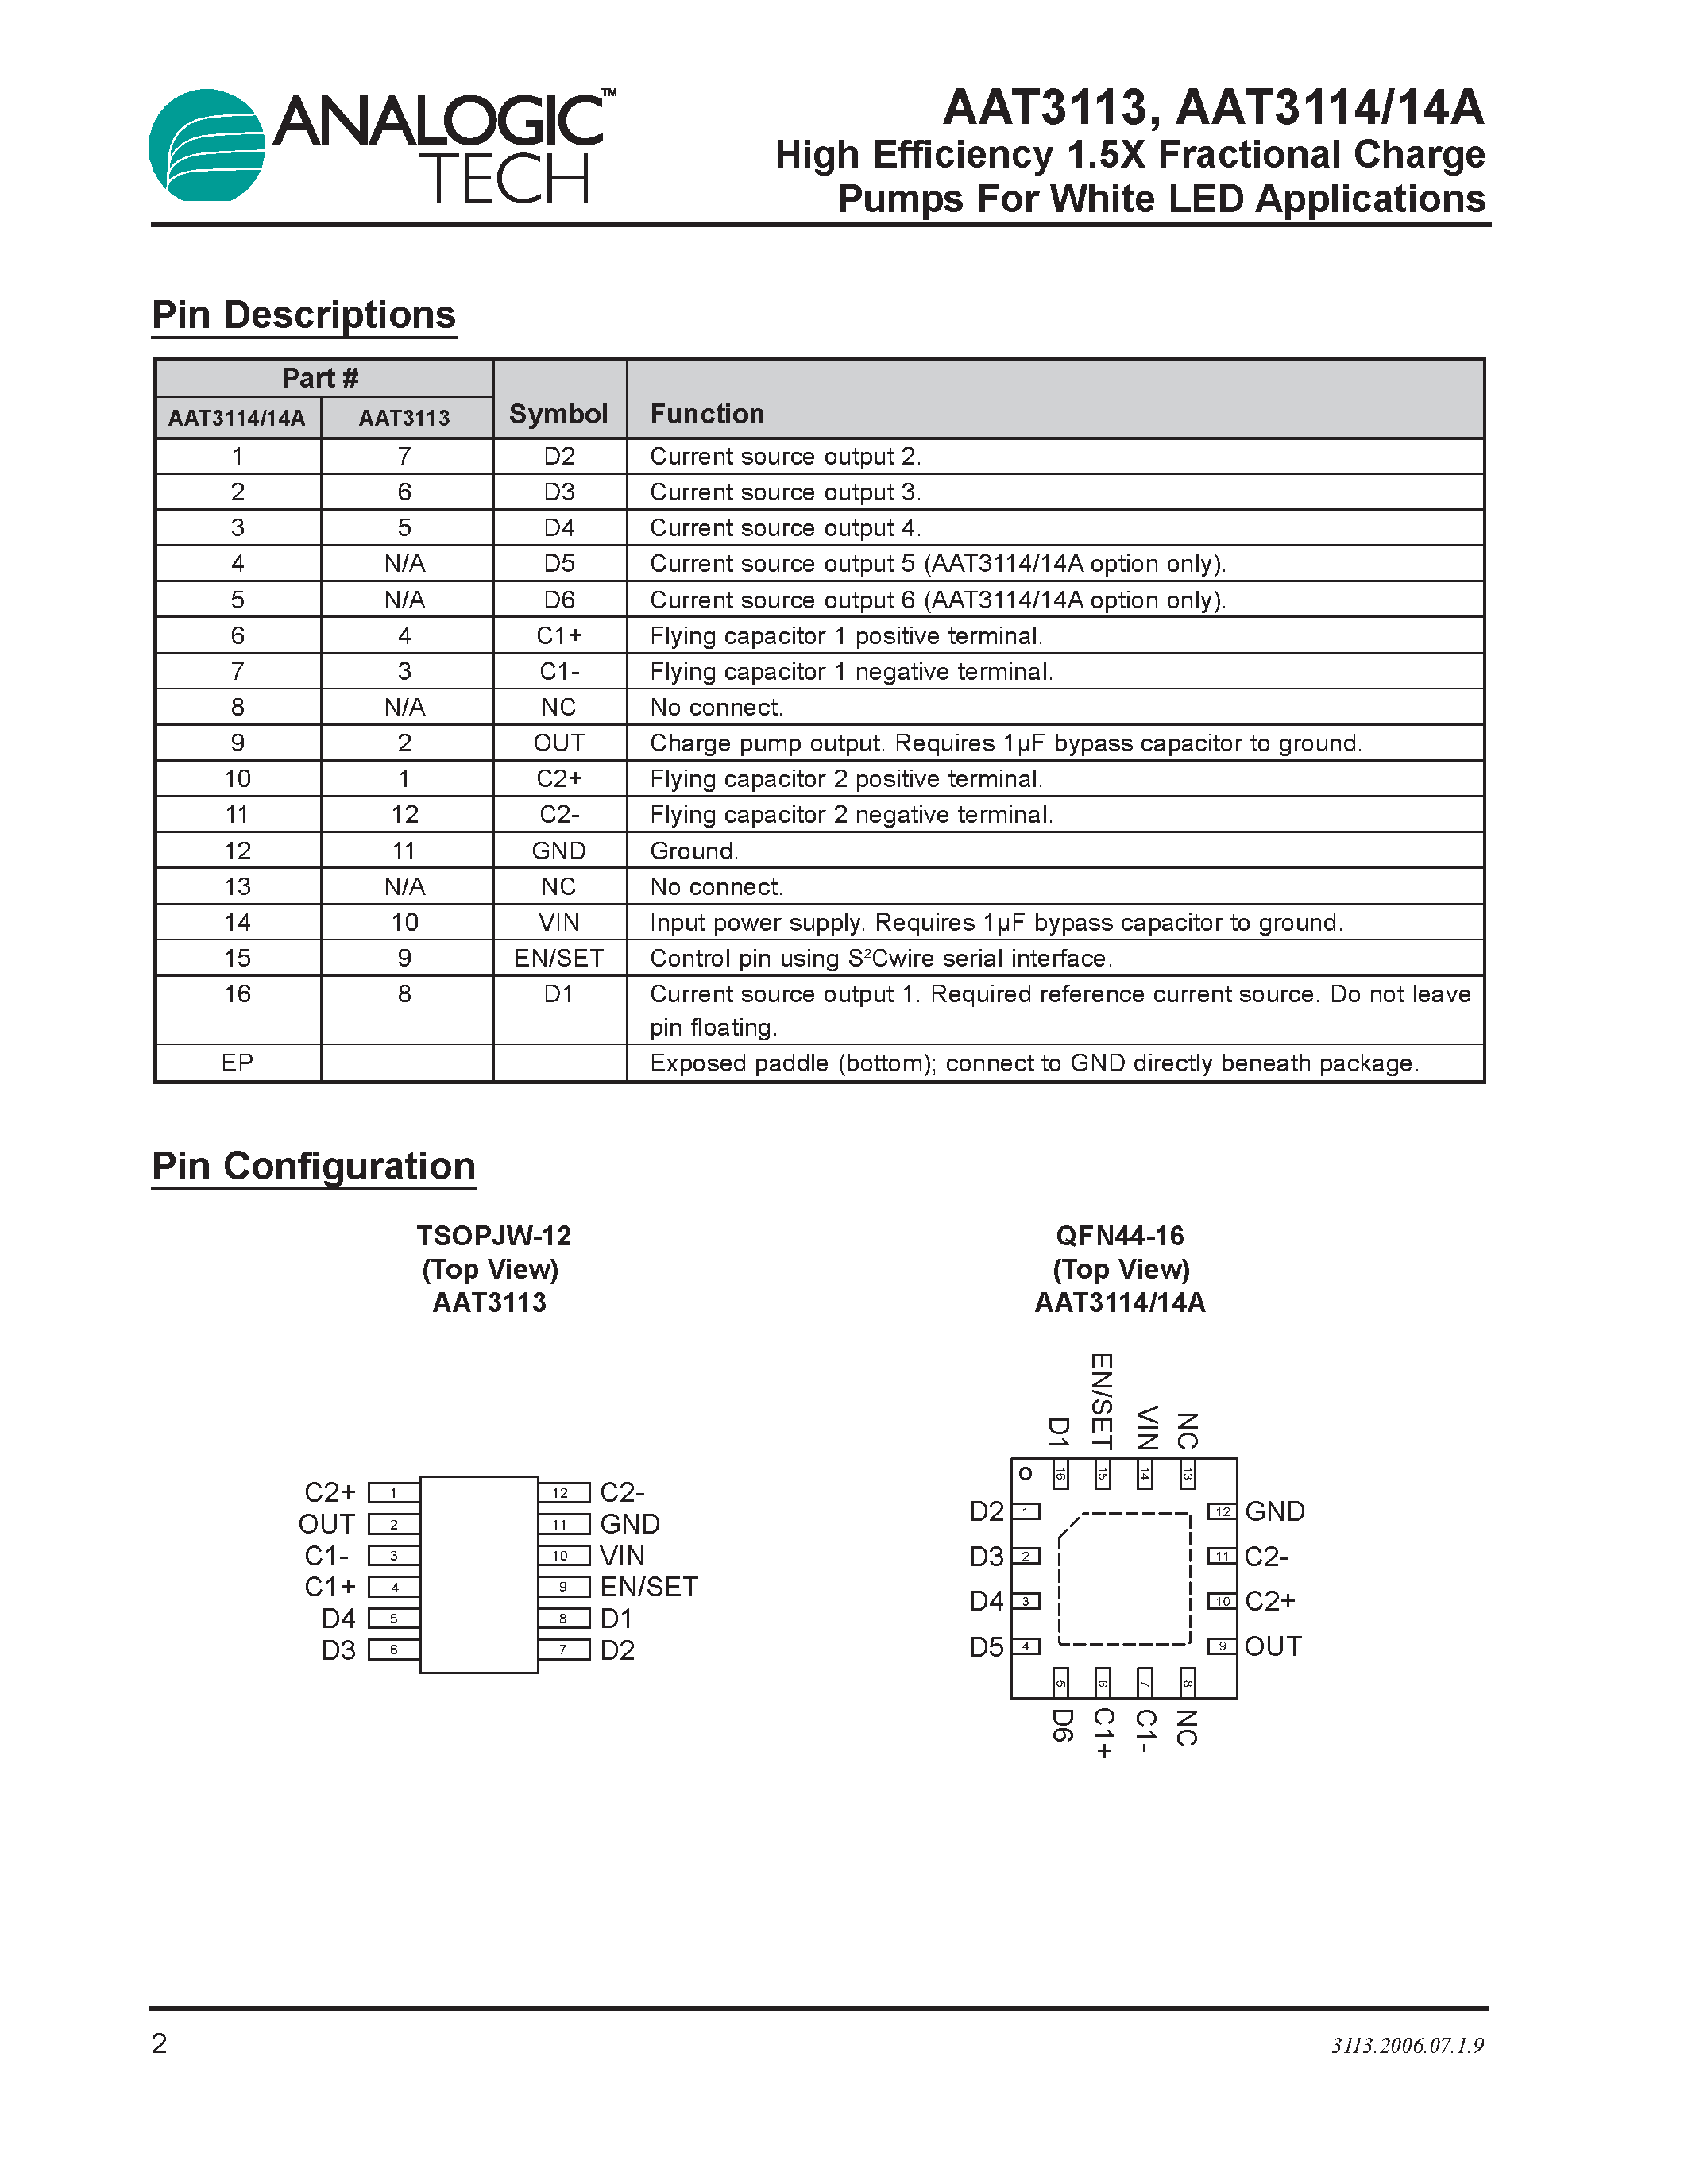 Datasheet AAT3114 - High Efficiency 1.5X Fractional Charge Pumps page 2